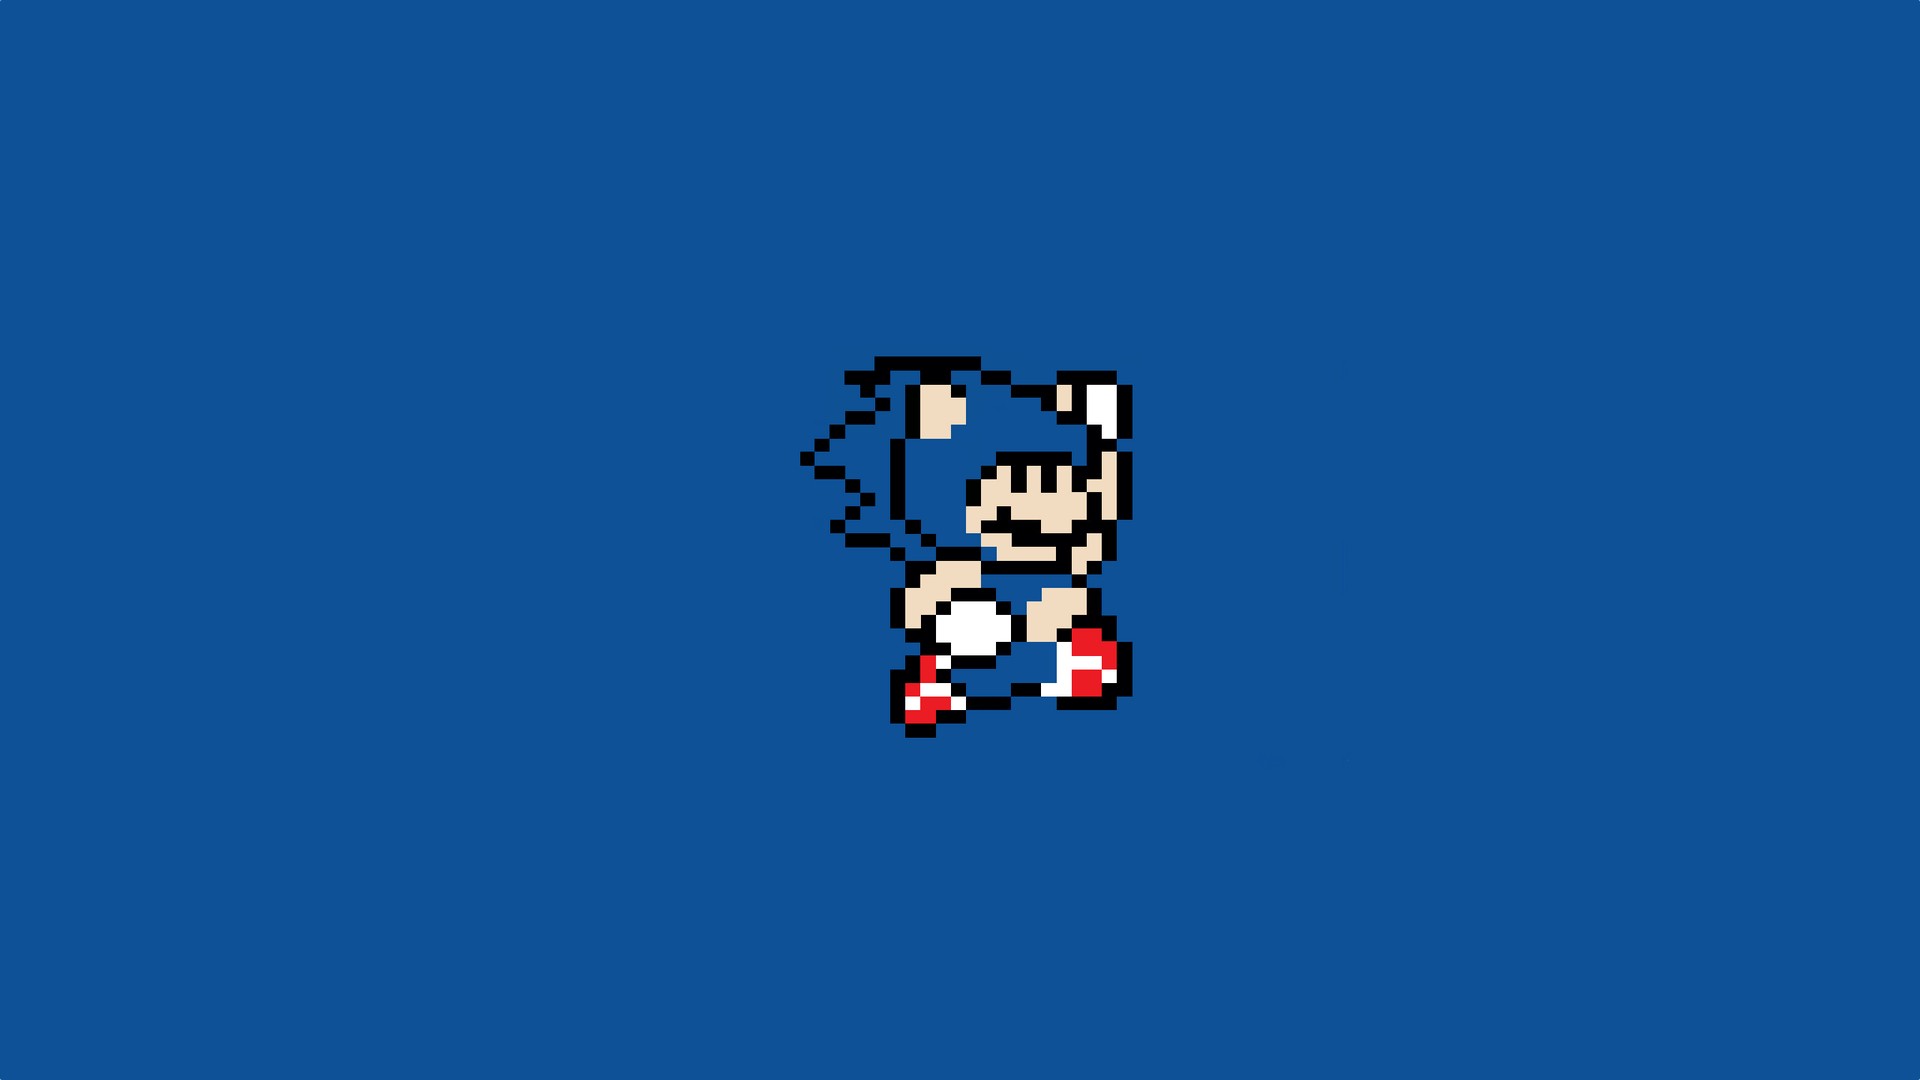 General 1920x1080 video game art video games pixel art simple background blue background minimalism Super Mario Sonic the Hedgehog crossover